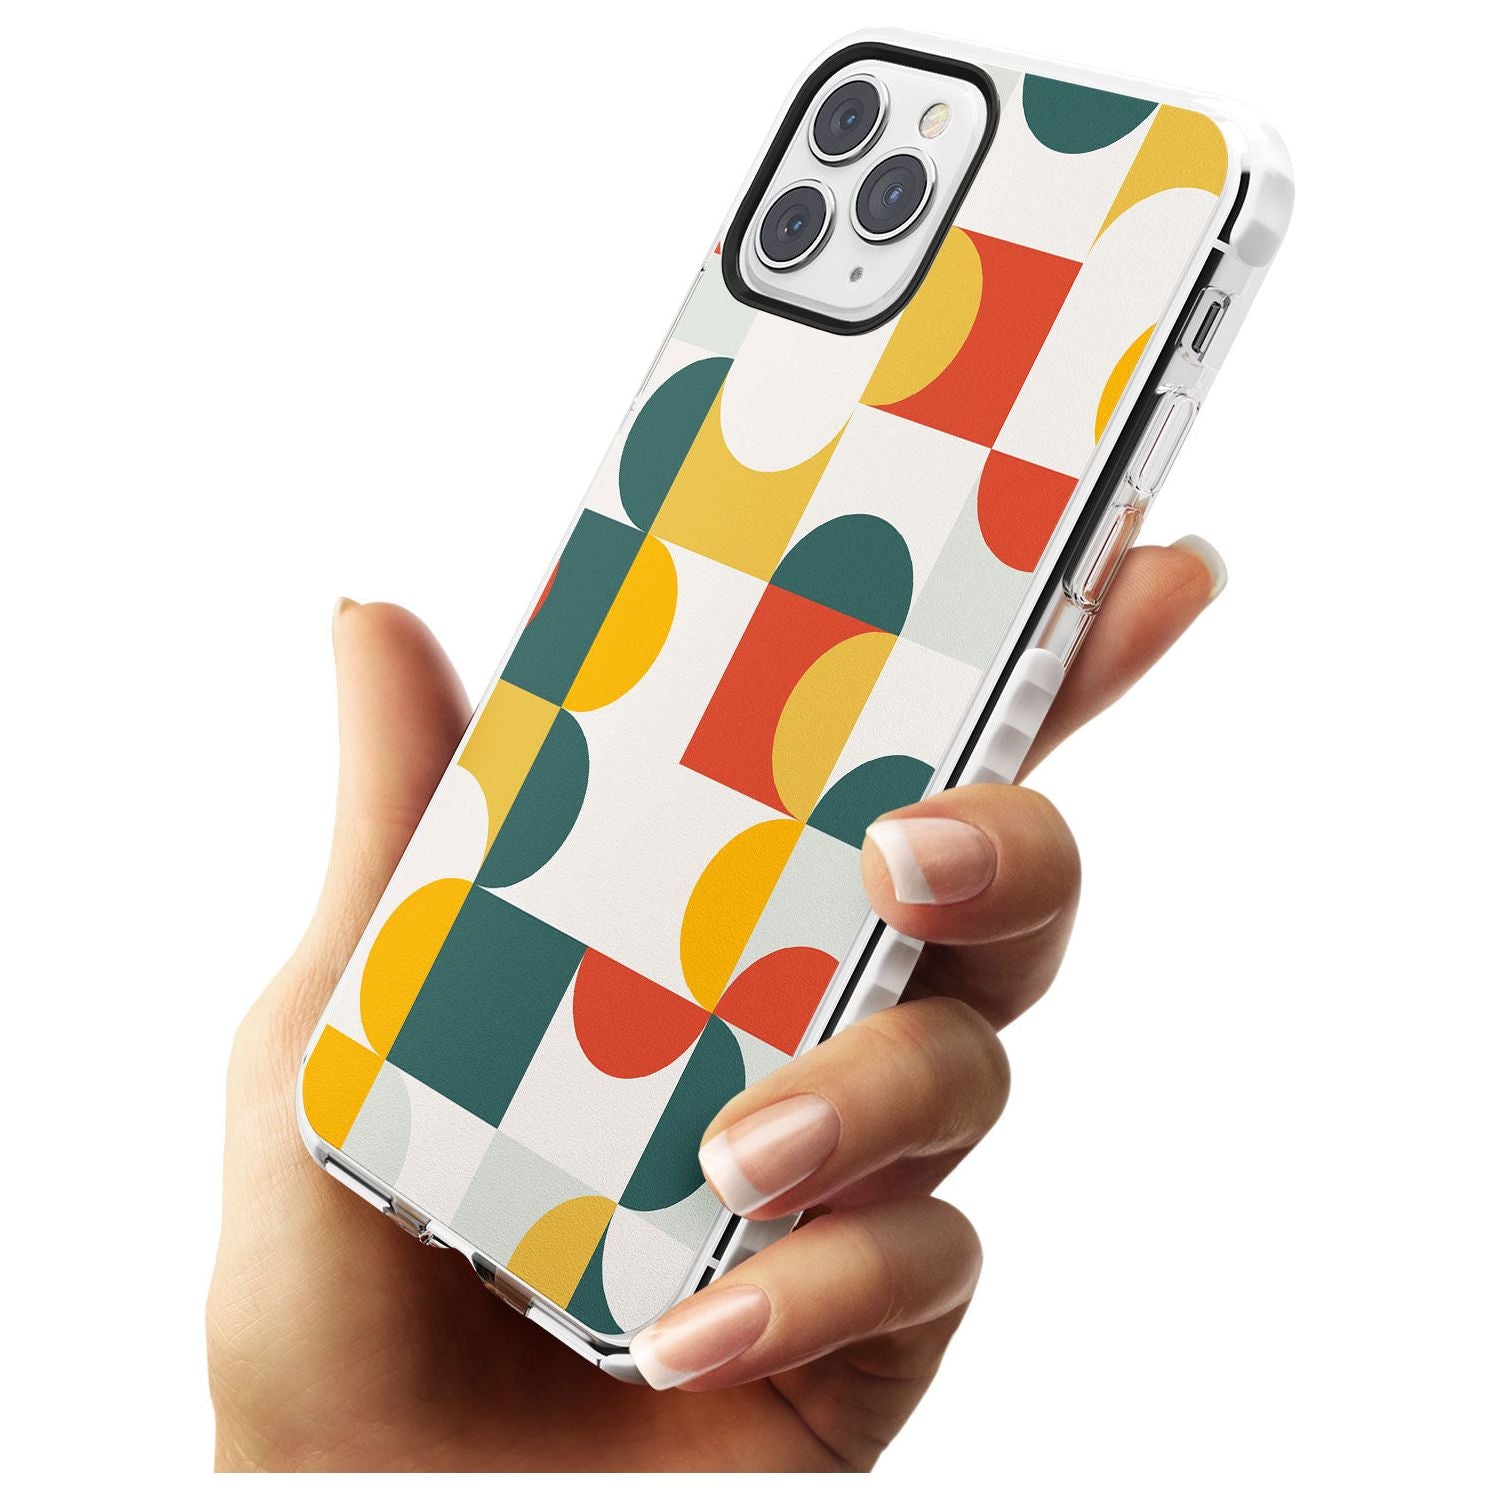 Abstract Retro Shapes: Muted Colour Mix Slim TPU Phone Case for iPhone 11 Pro Max